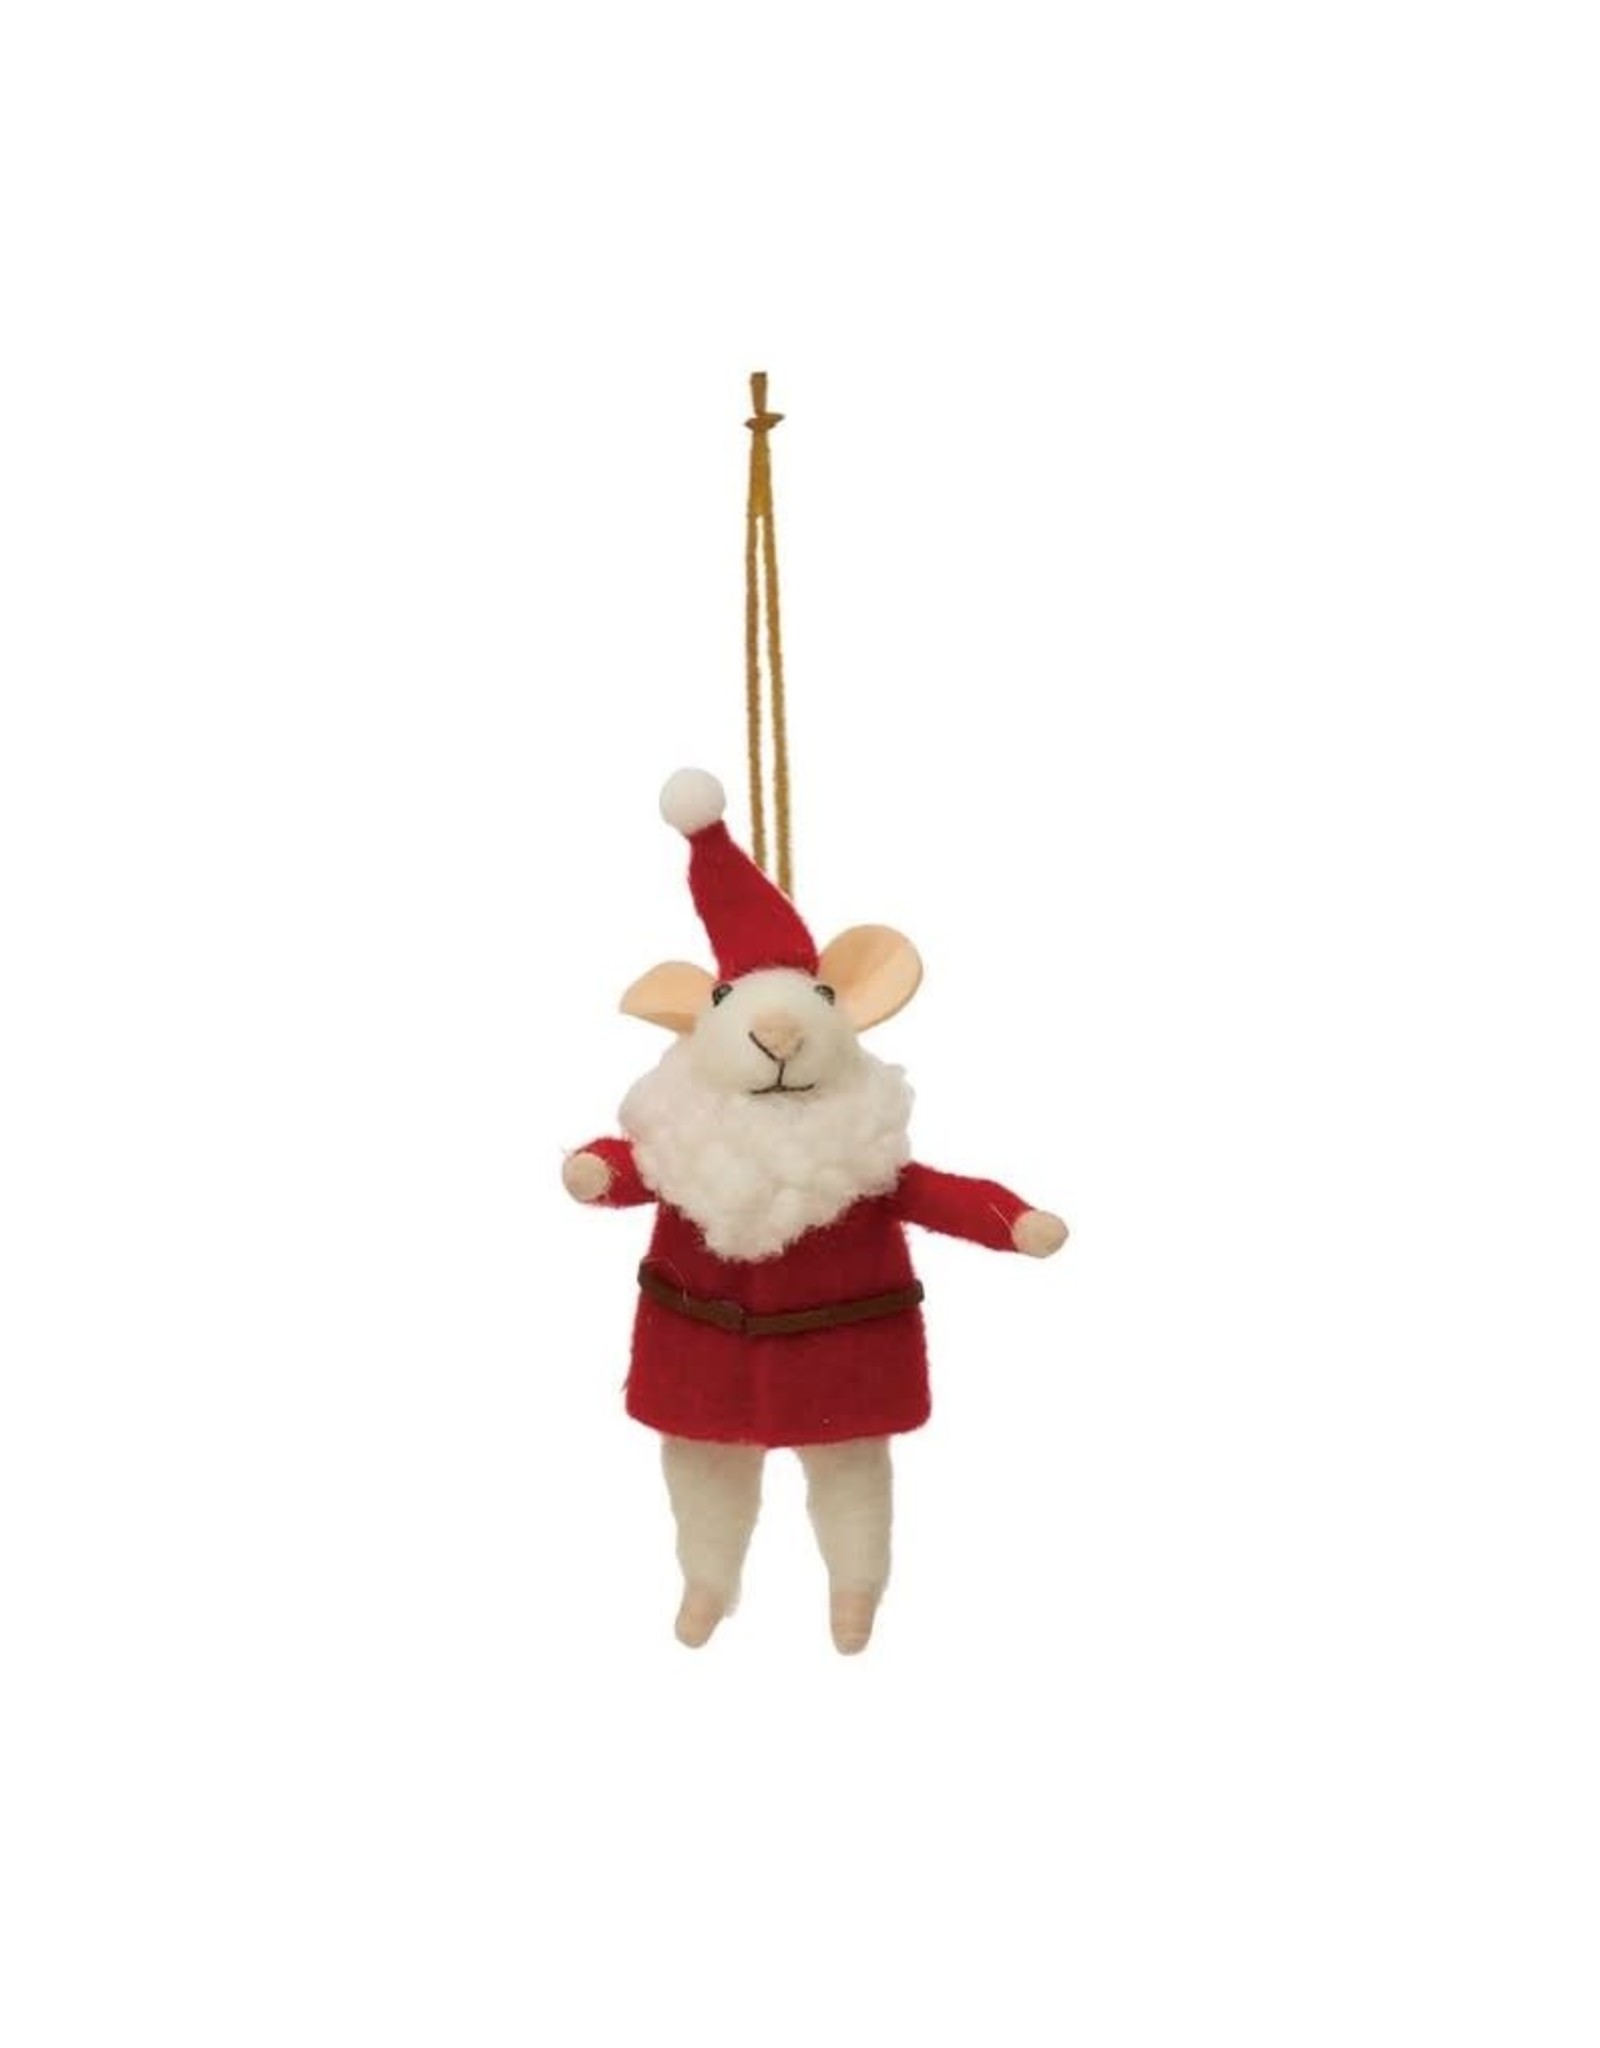 Wool Felt Mouse in Santa Outfit Ornament